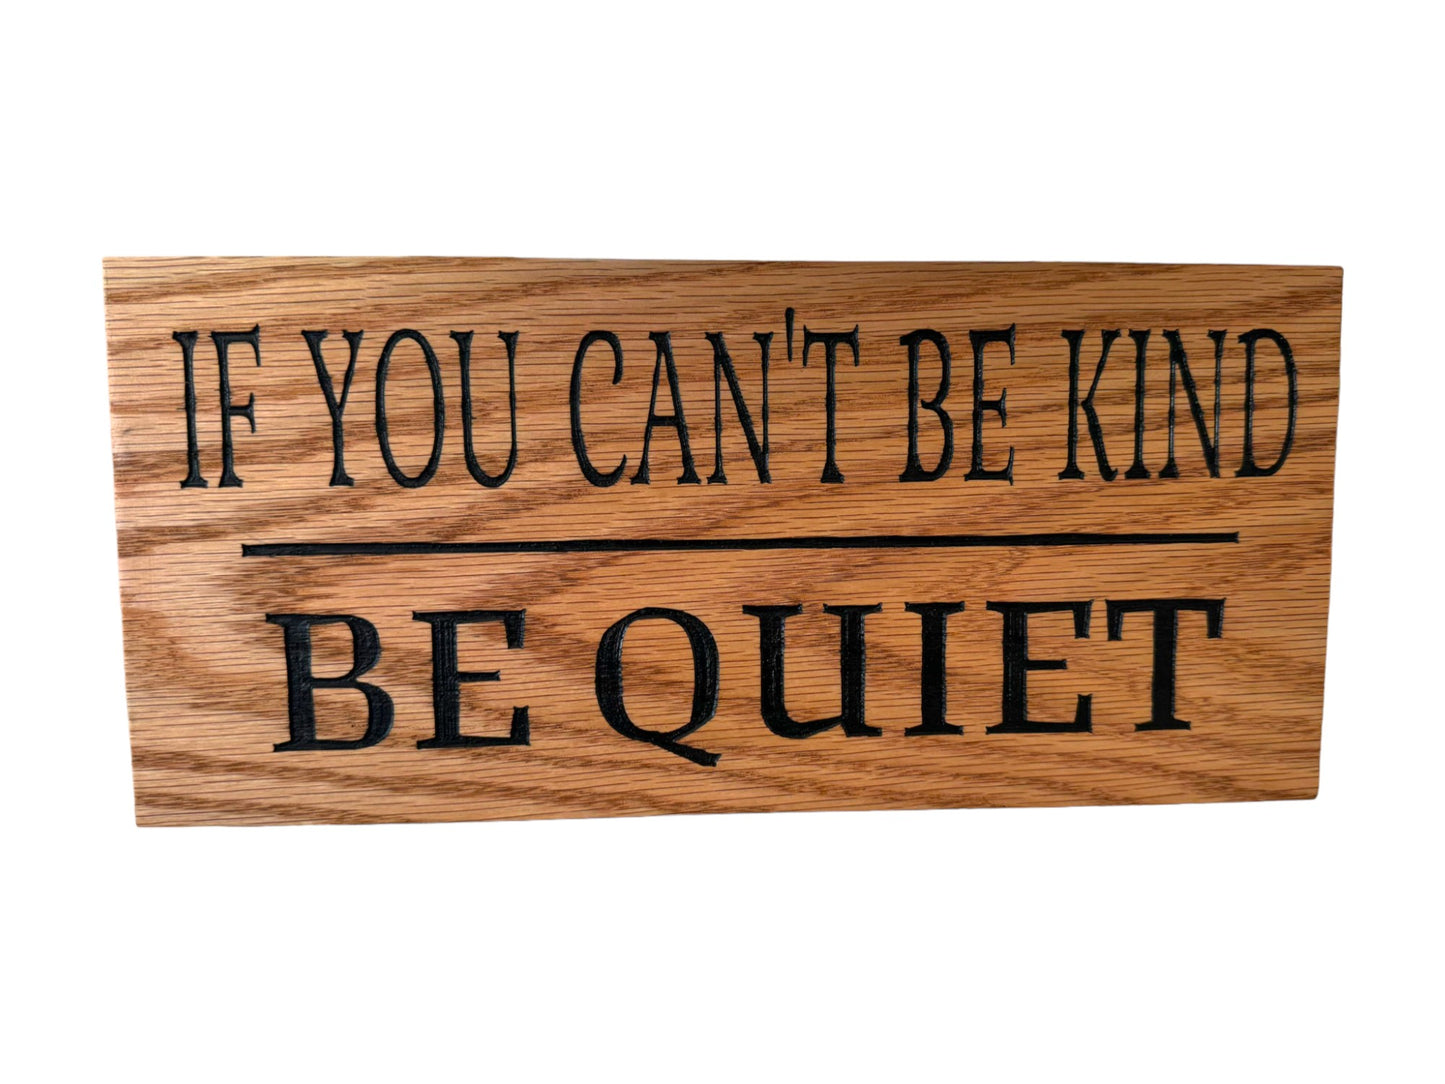 If You Can't Be Kind, Be Quiet" Carved Wood Sign: 5.5"x12" with bold black text on light stained background.